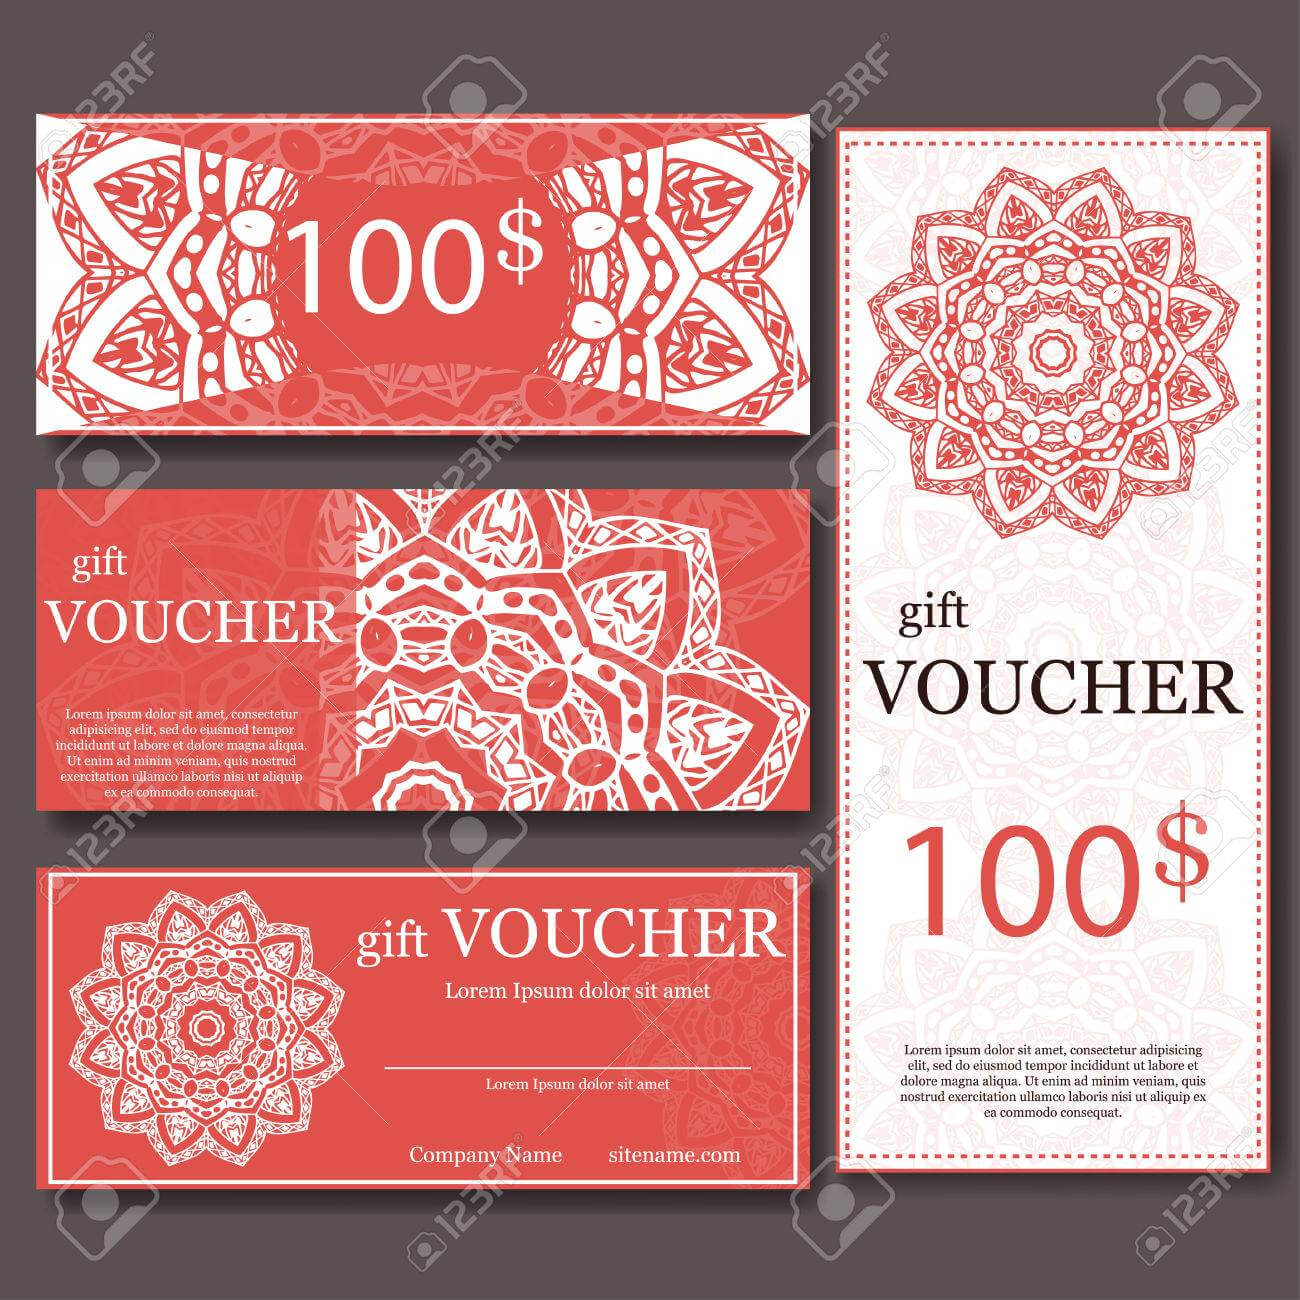 Gift Voucher Template With Mandala. Design Certificate For Sport.. For Yoga Gift Certificate Template Free